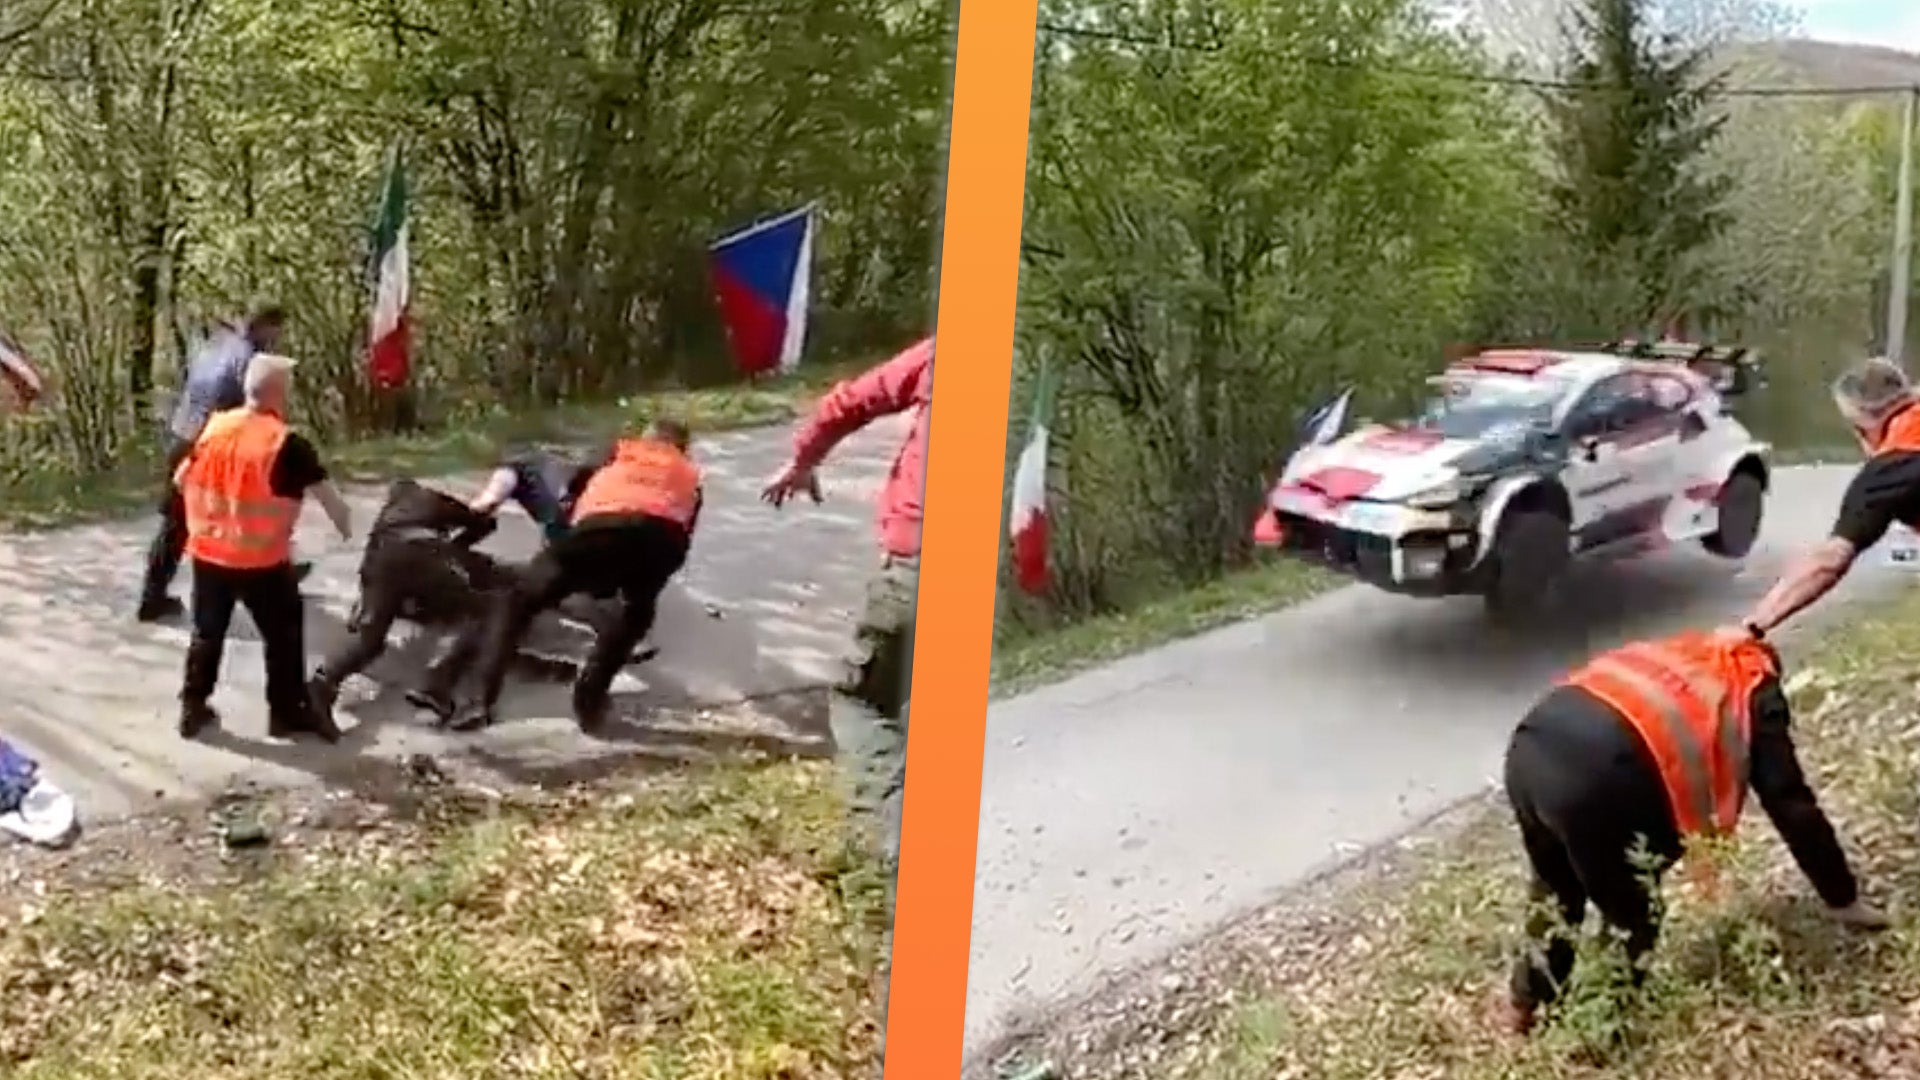 brawling-idiots-nearly-clobbered-by-toyota-gr-yaris-during-wrc-race